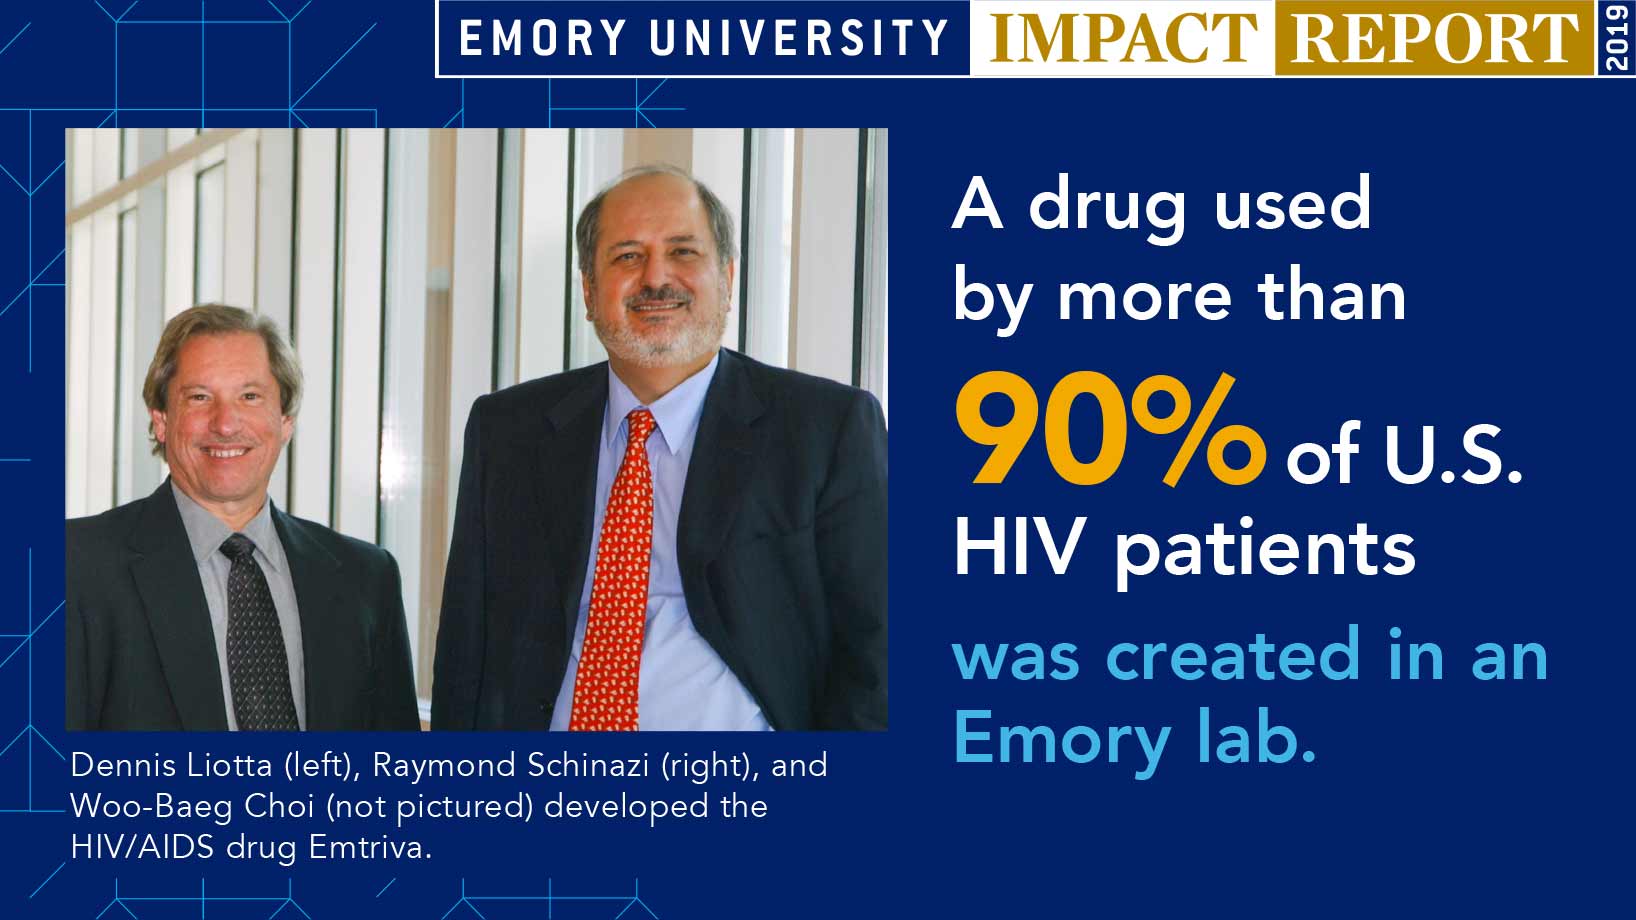 The drug, Emtriva, is used by more than 90% of US HIV patients, and it was created in an Emory lab by Dennis Liotta and Raymond Schinazi.